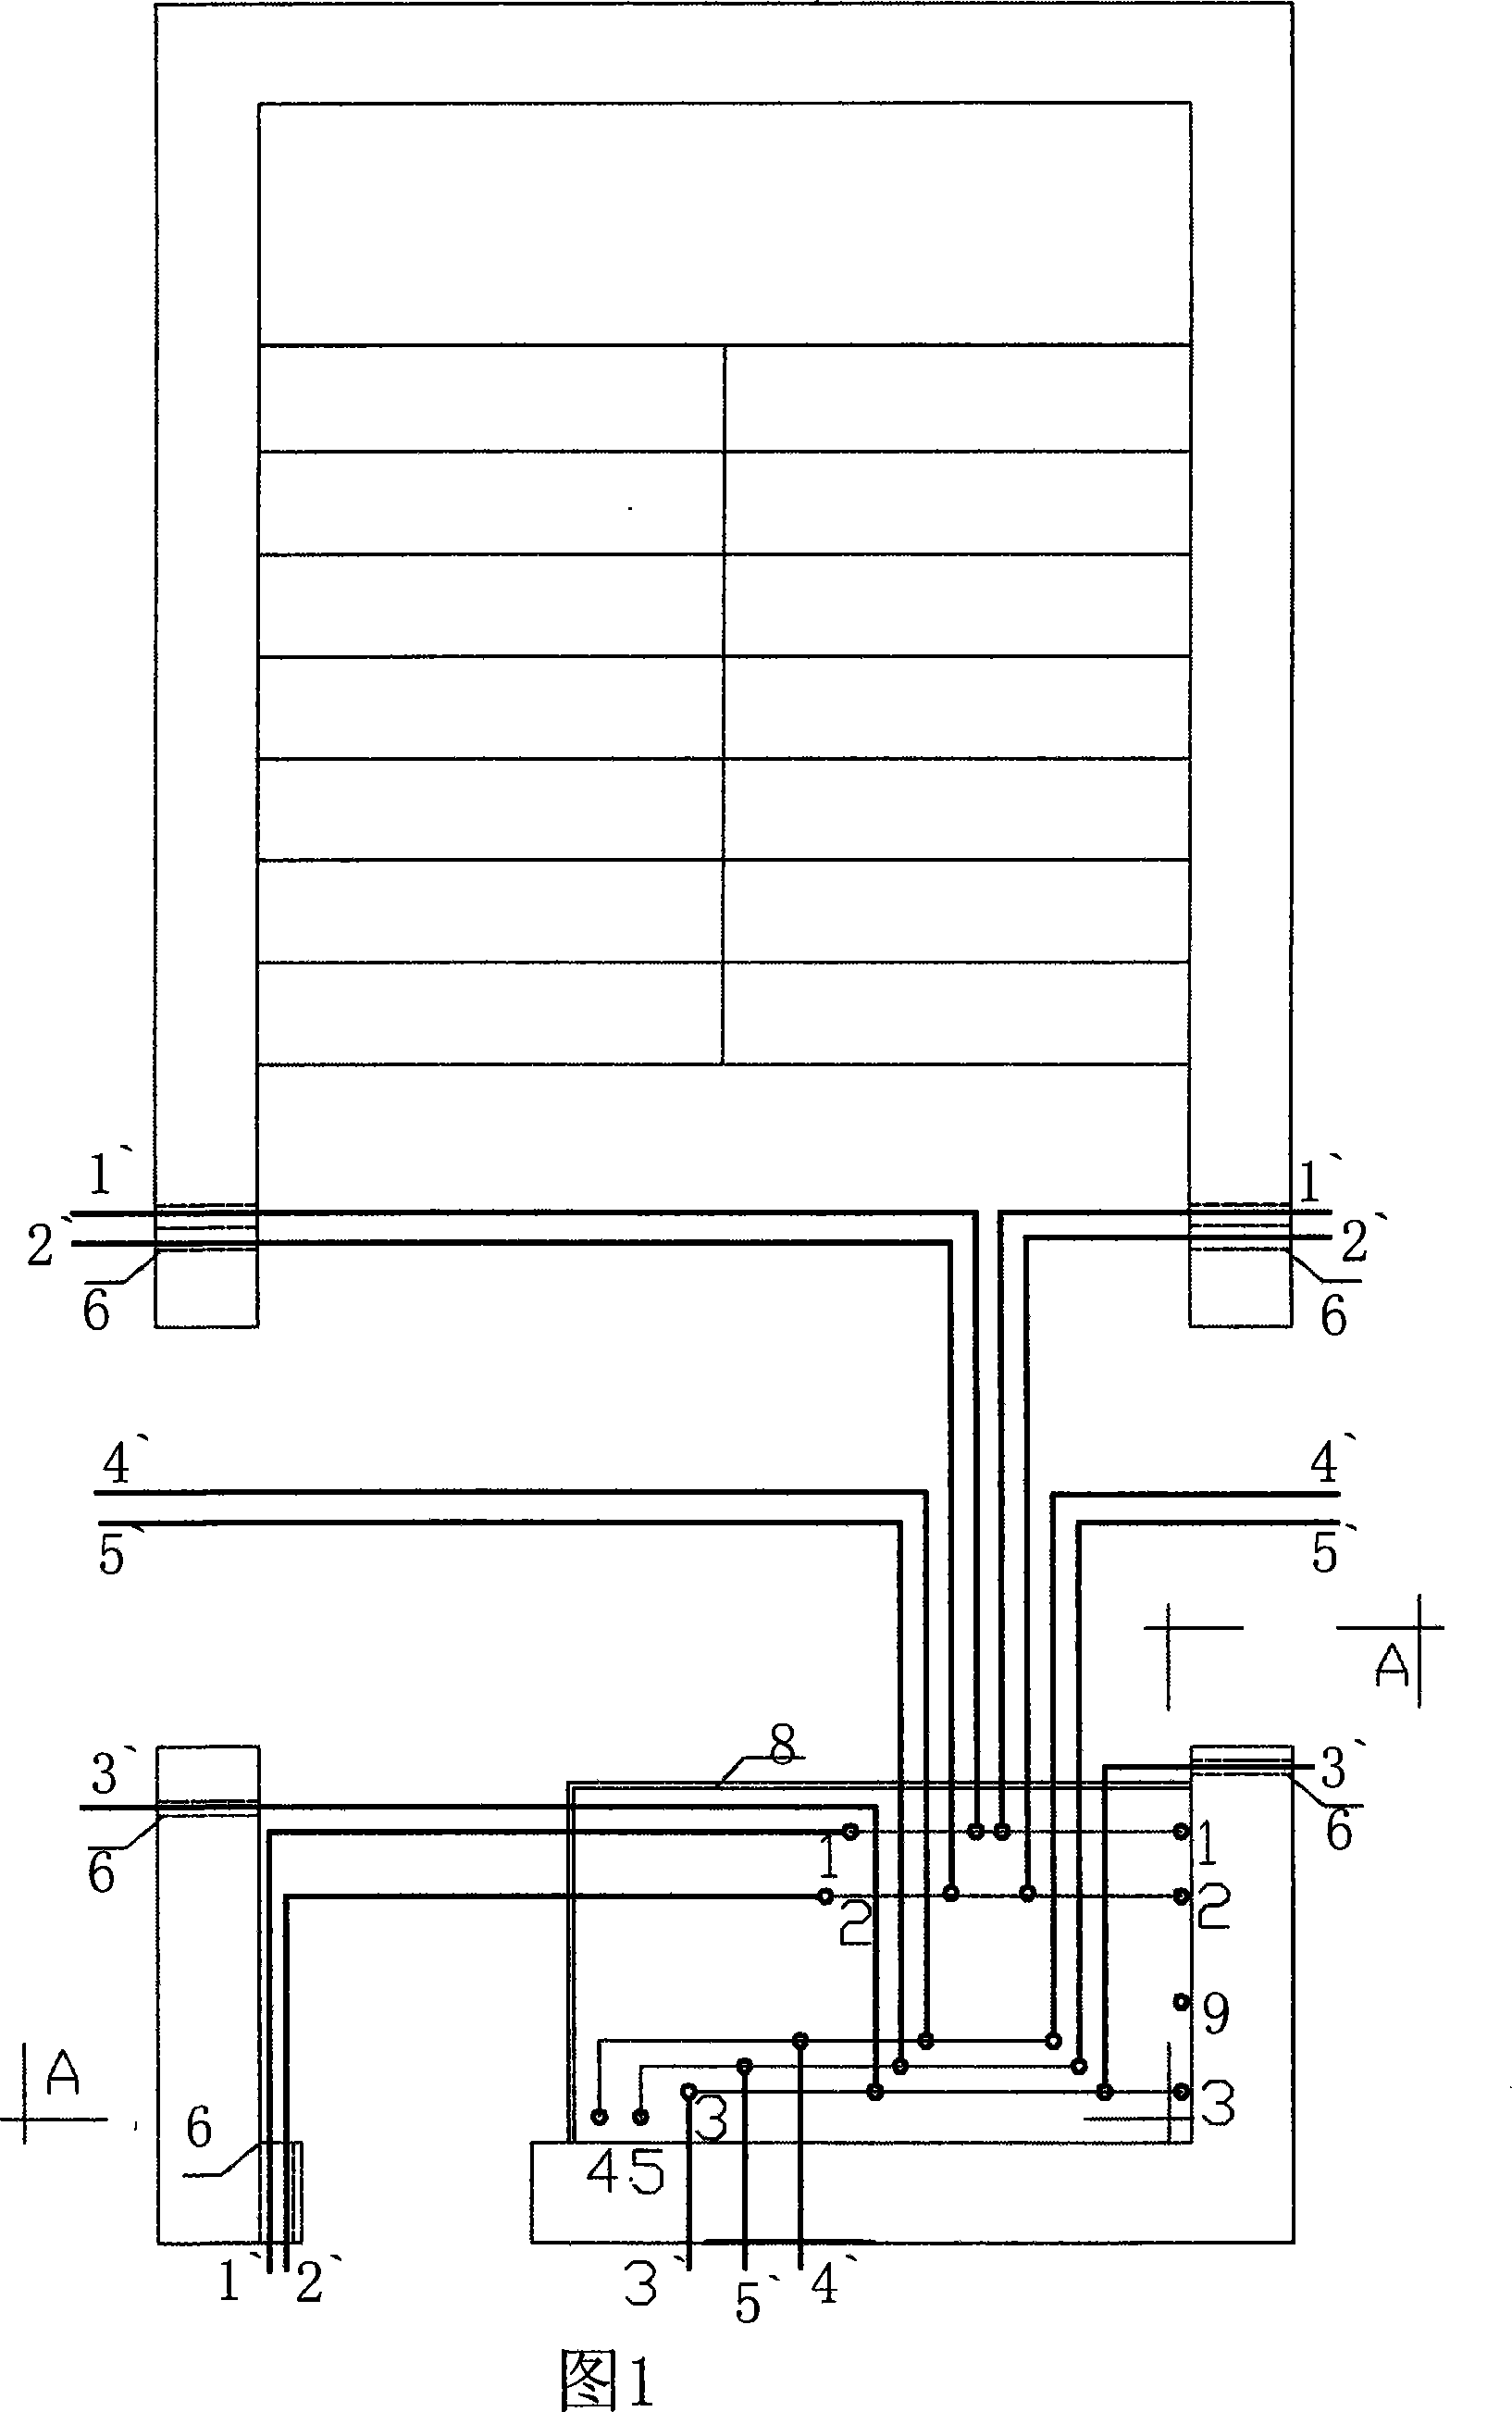 Split method of integrated vertical pipe for one-elevator and multiple-apartment building